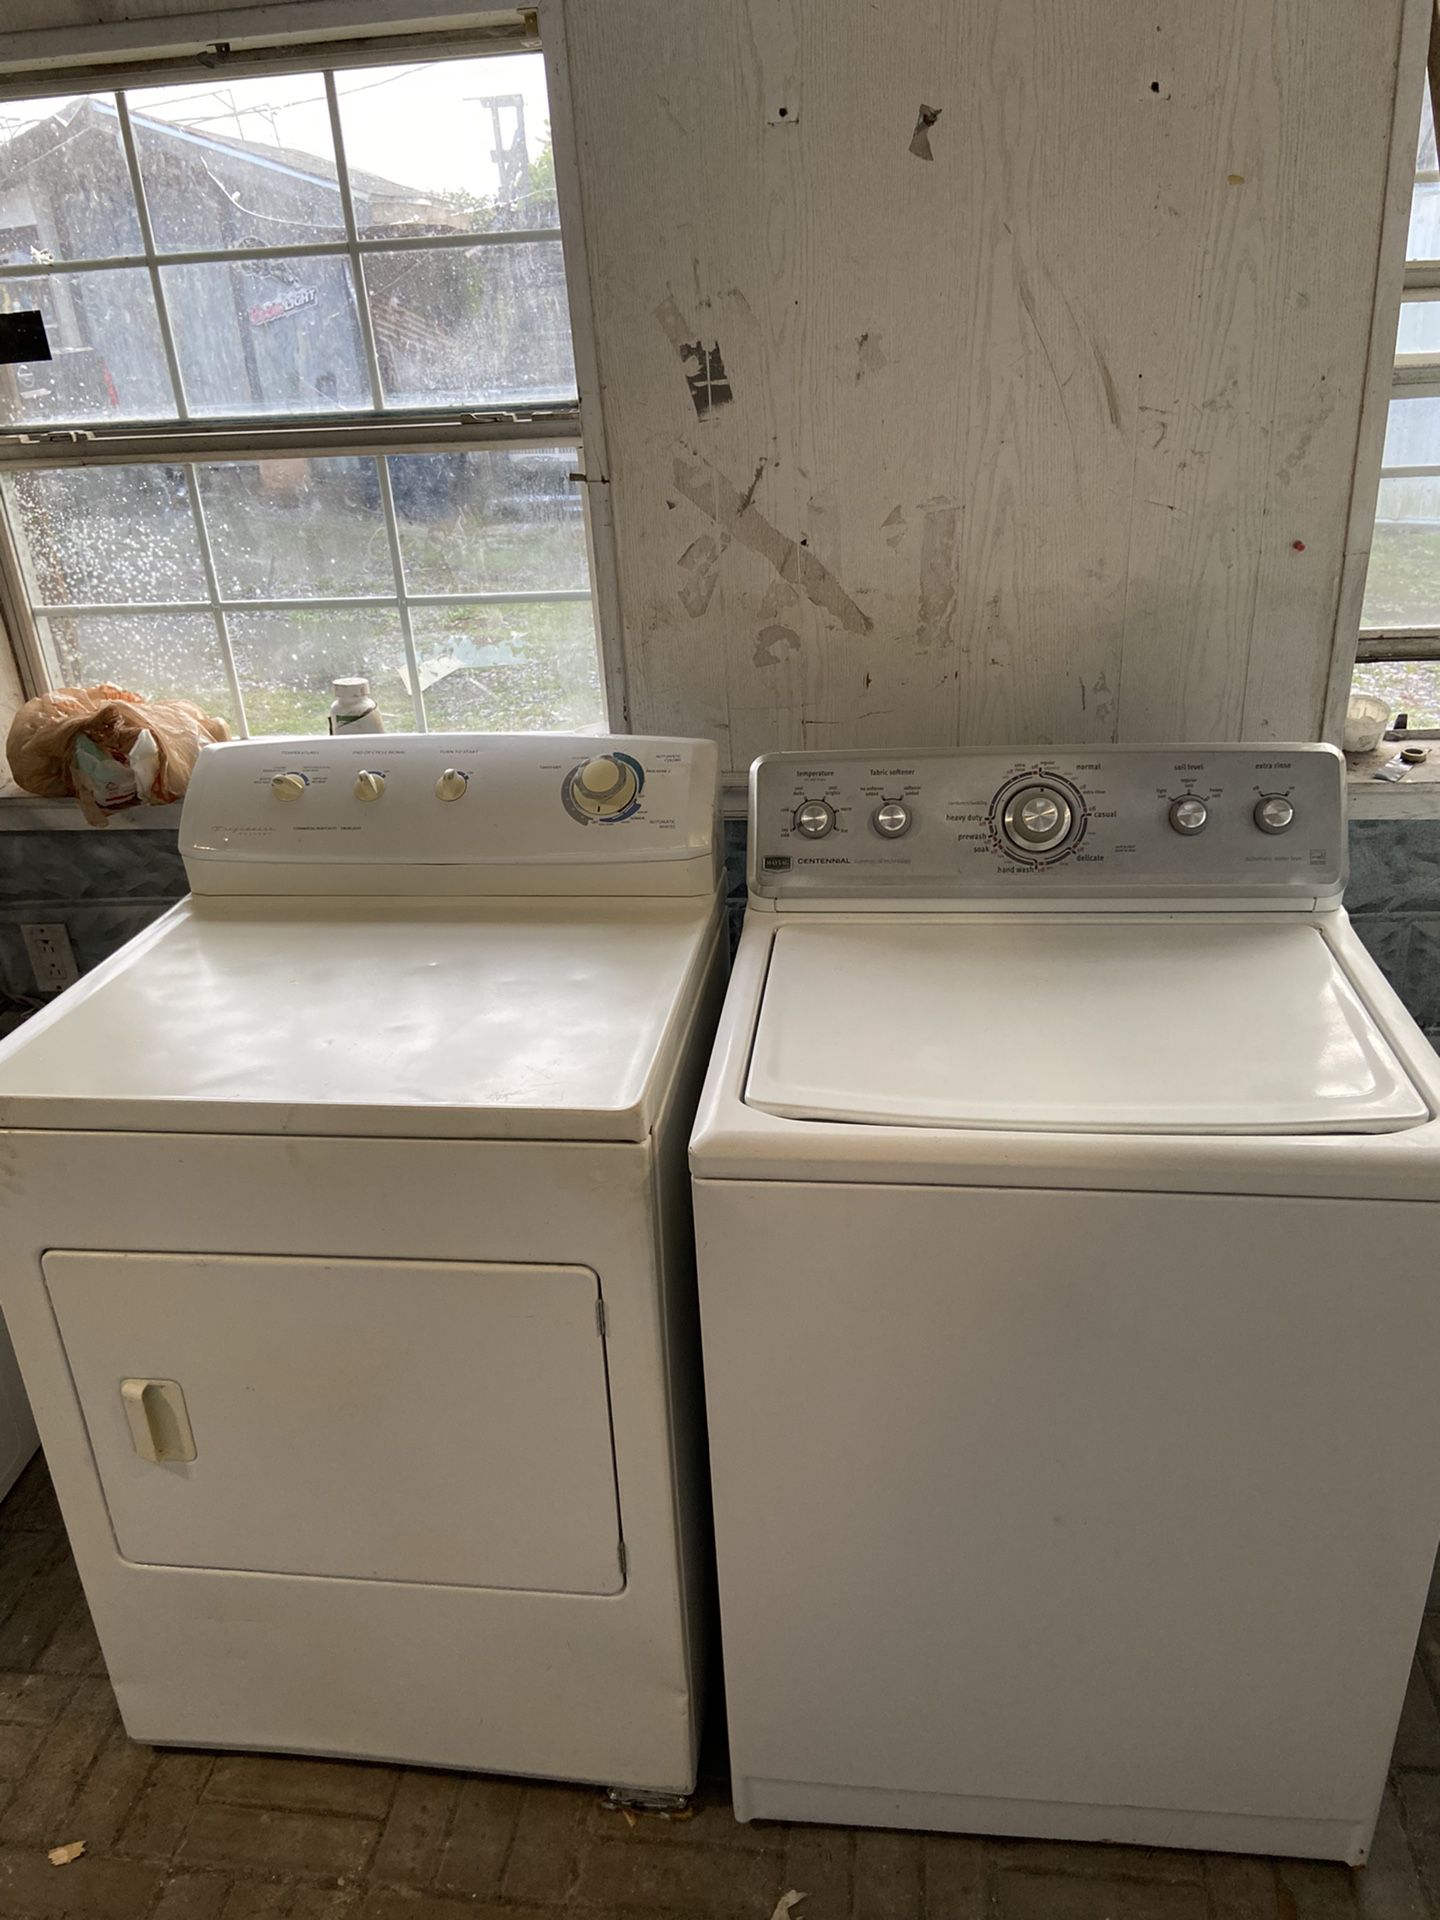 MAYTAG  WASHER & FRIGIDAIRE ELECTRIC DRYER SET! BOTH RUN LIKE NEW! BOTH RUN GREAT! NOTHING MISSING ON THEM! ALL MODES WORK ON BOTH! 